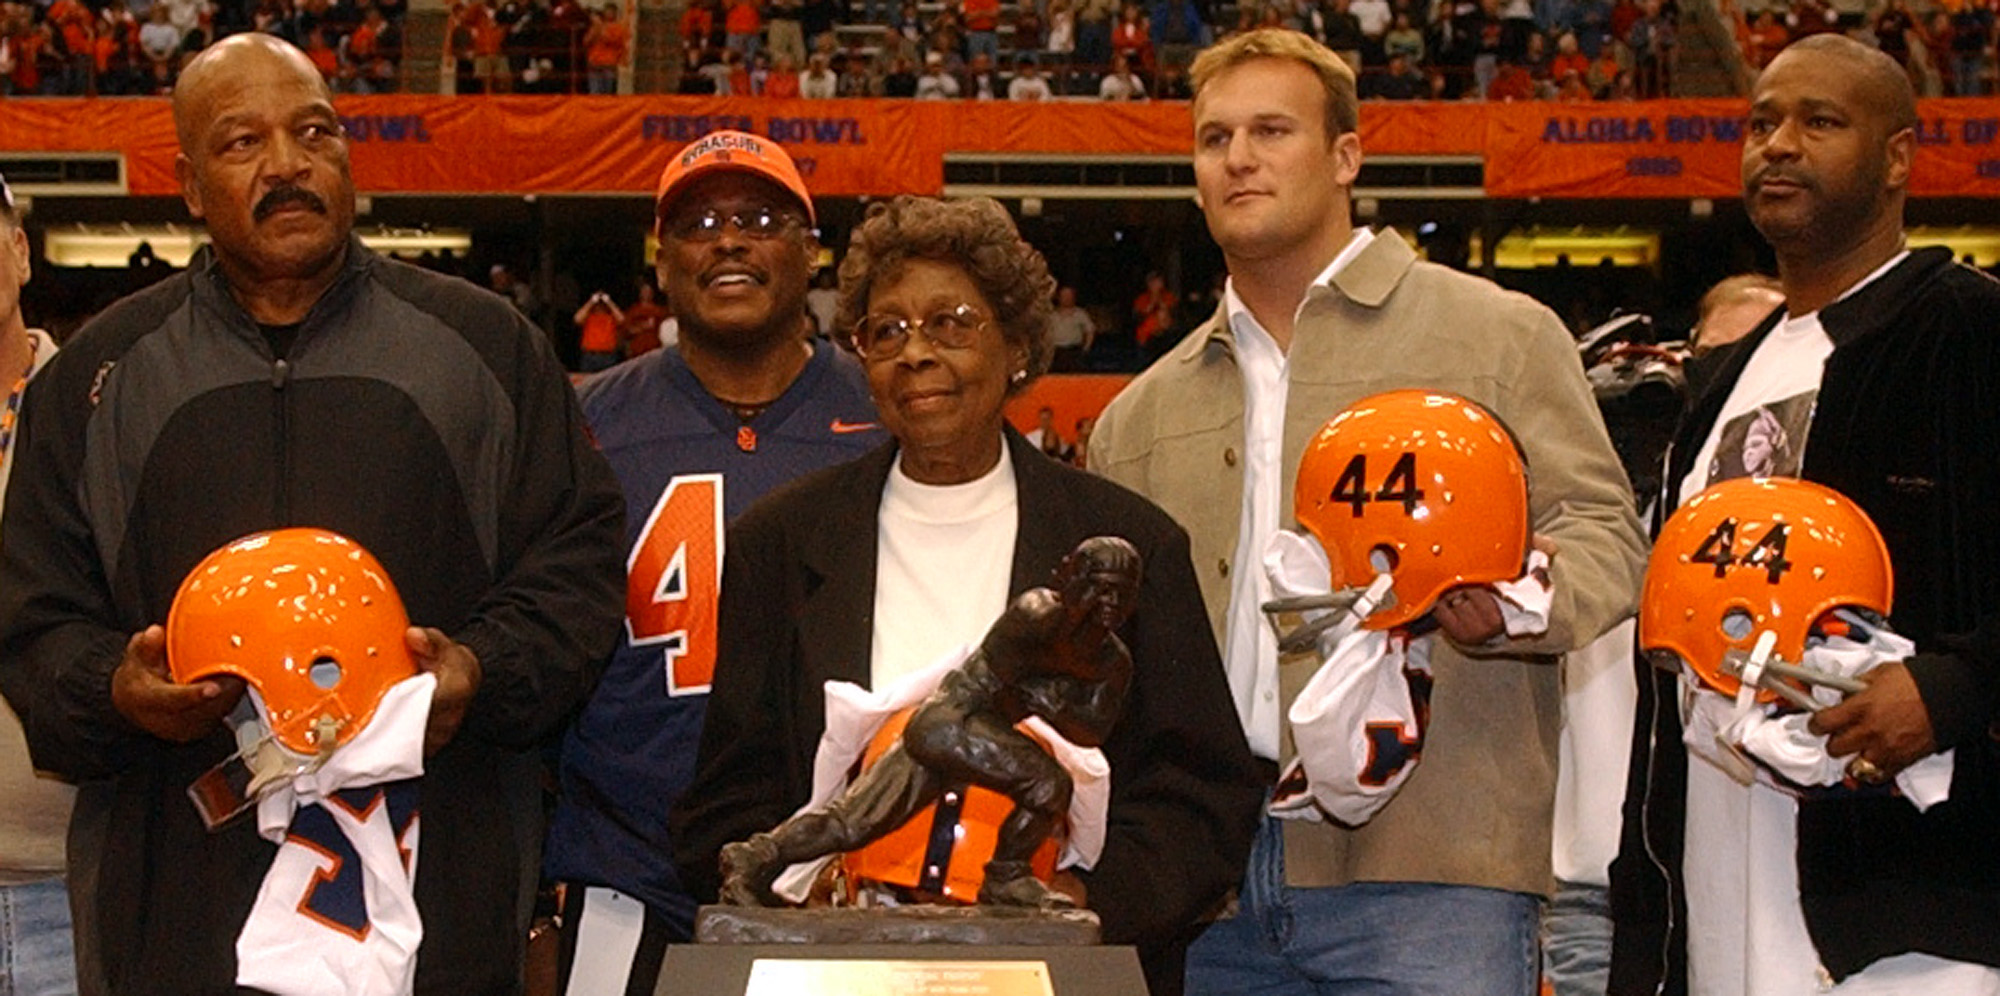 Marie Fleming, mother of Ernie Davis, stands with  Jim Brown, Floyd Little, Rob Konrad and Michael Owens during a 2005 retirement ceremony of the jersey number 44 at the Carrier Dome.